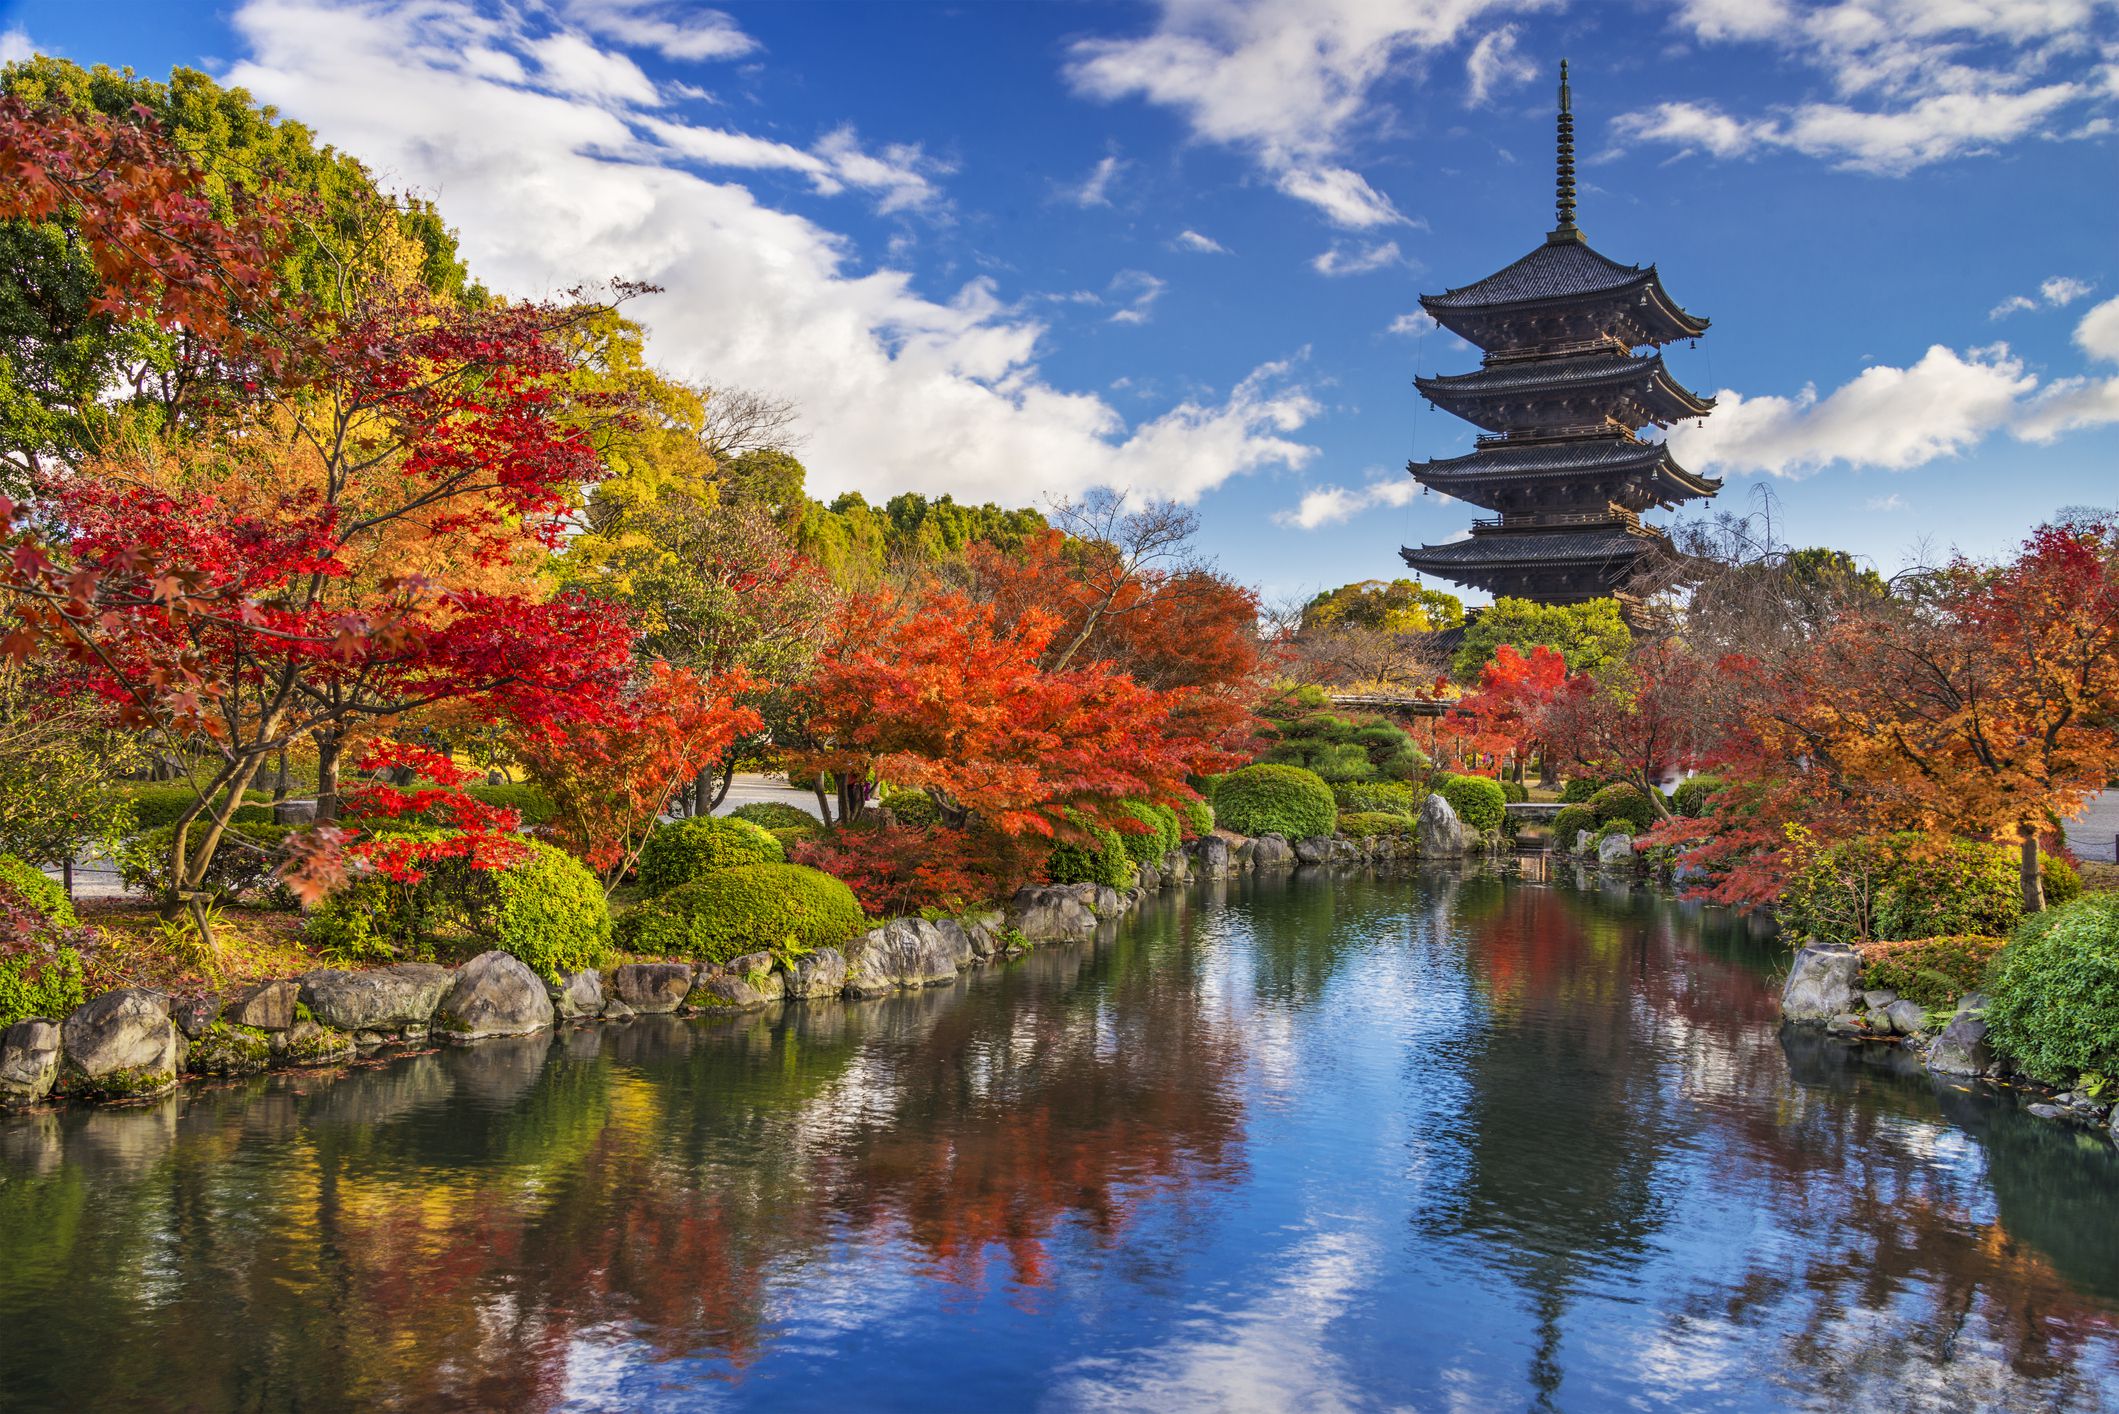 <p>From 794 to 1868, Kyoto was the capital of Japan. By the time it shifted to Tokyo, Kyoto was an established center of arts and Japanese culture.</p><p>The city is filled with lantern-lined streets, traditional teahouses, and around 2,000 Shinto shrines and Buddhist temples. You’ll also be able to see the iconic Golden Pavillion, a five-story wooden structure painted in glistening gold.</p>